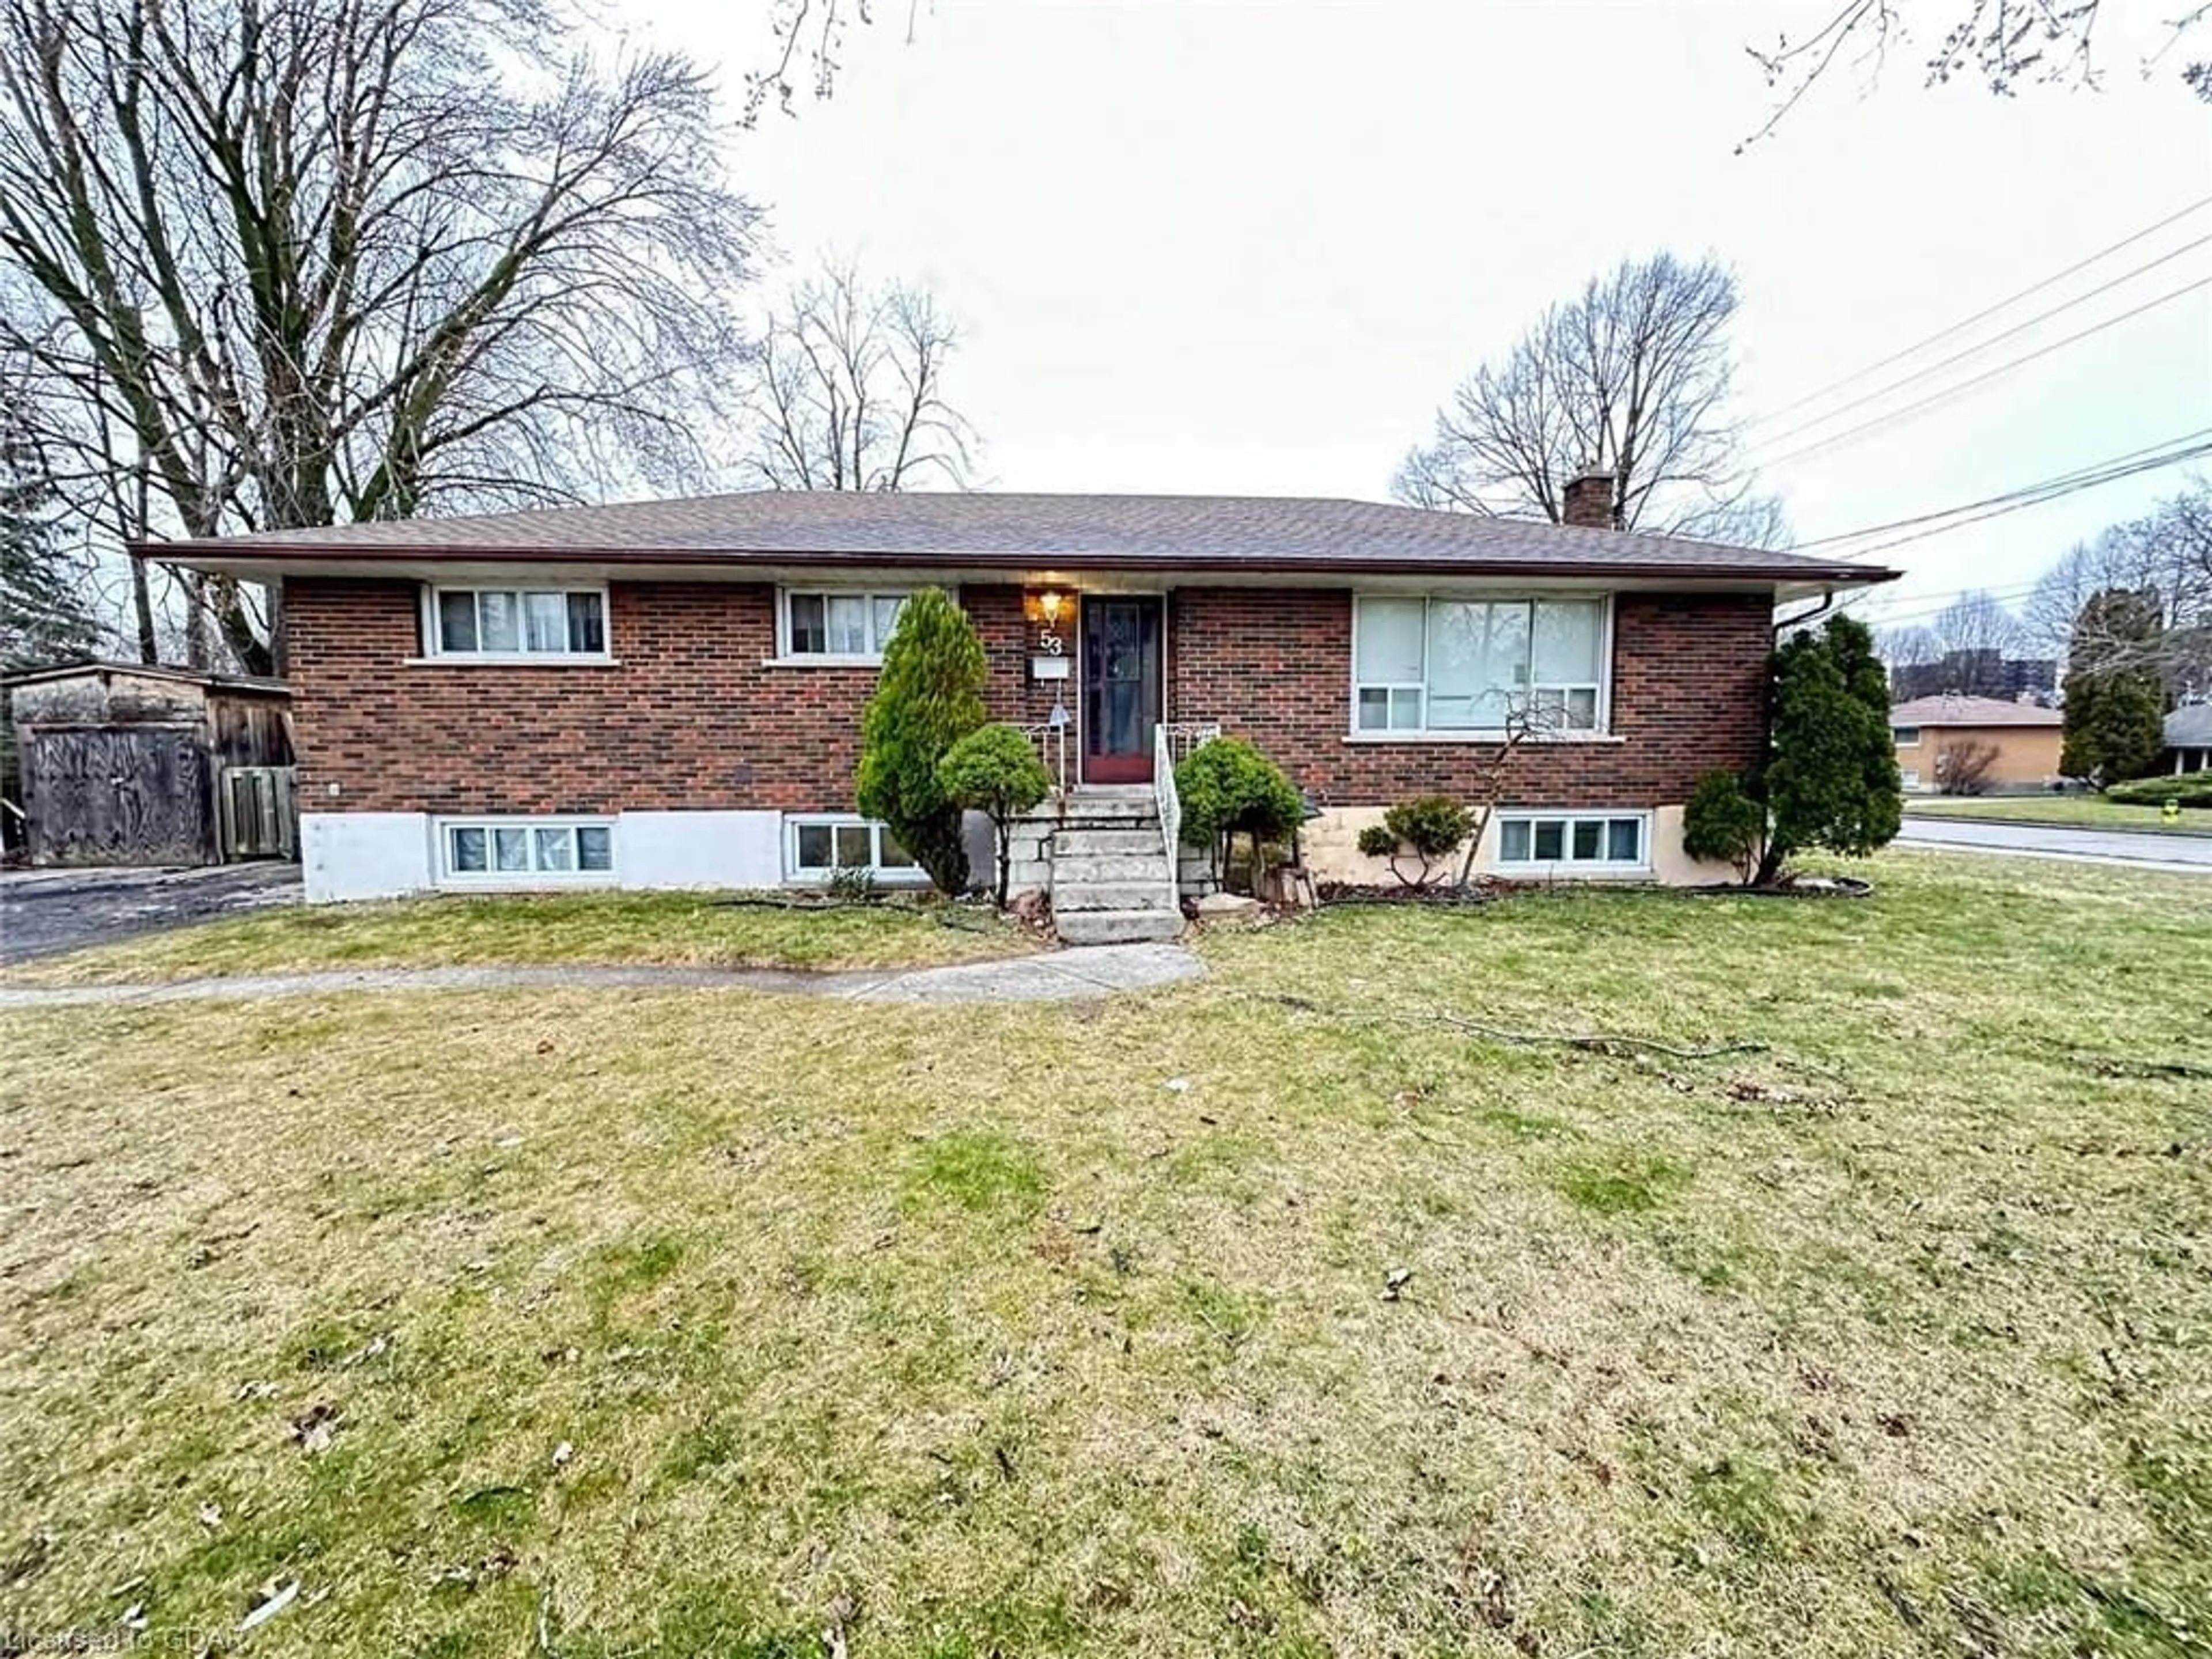 Home with brick exterior material for 53 Nicklin Cres, Guelph Ontario N1H 5G1